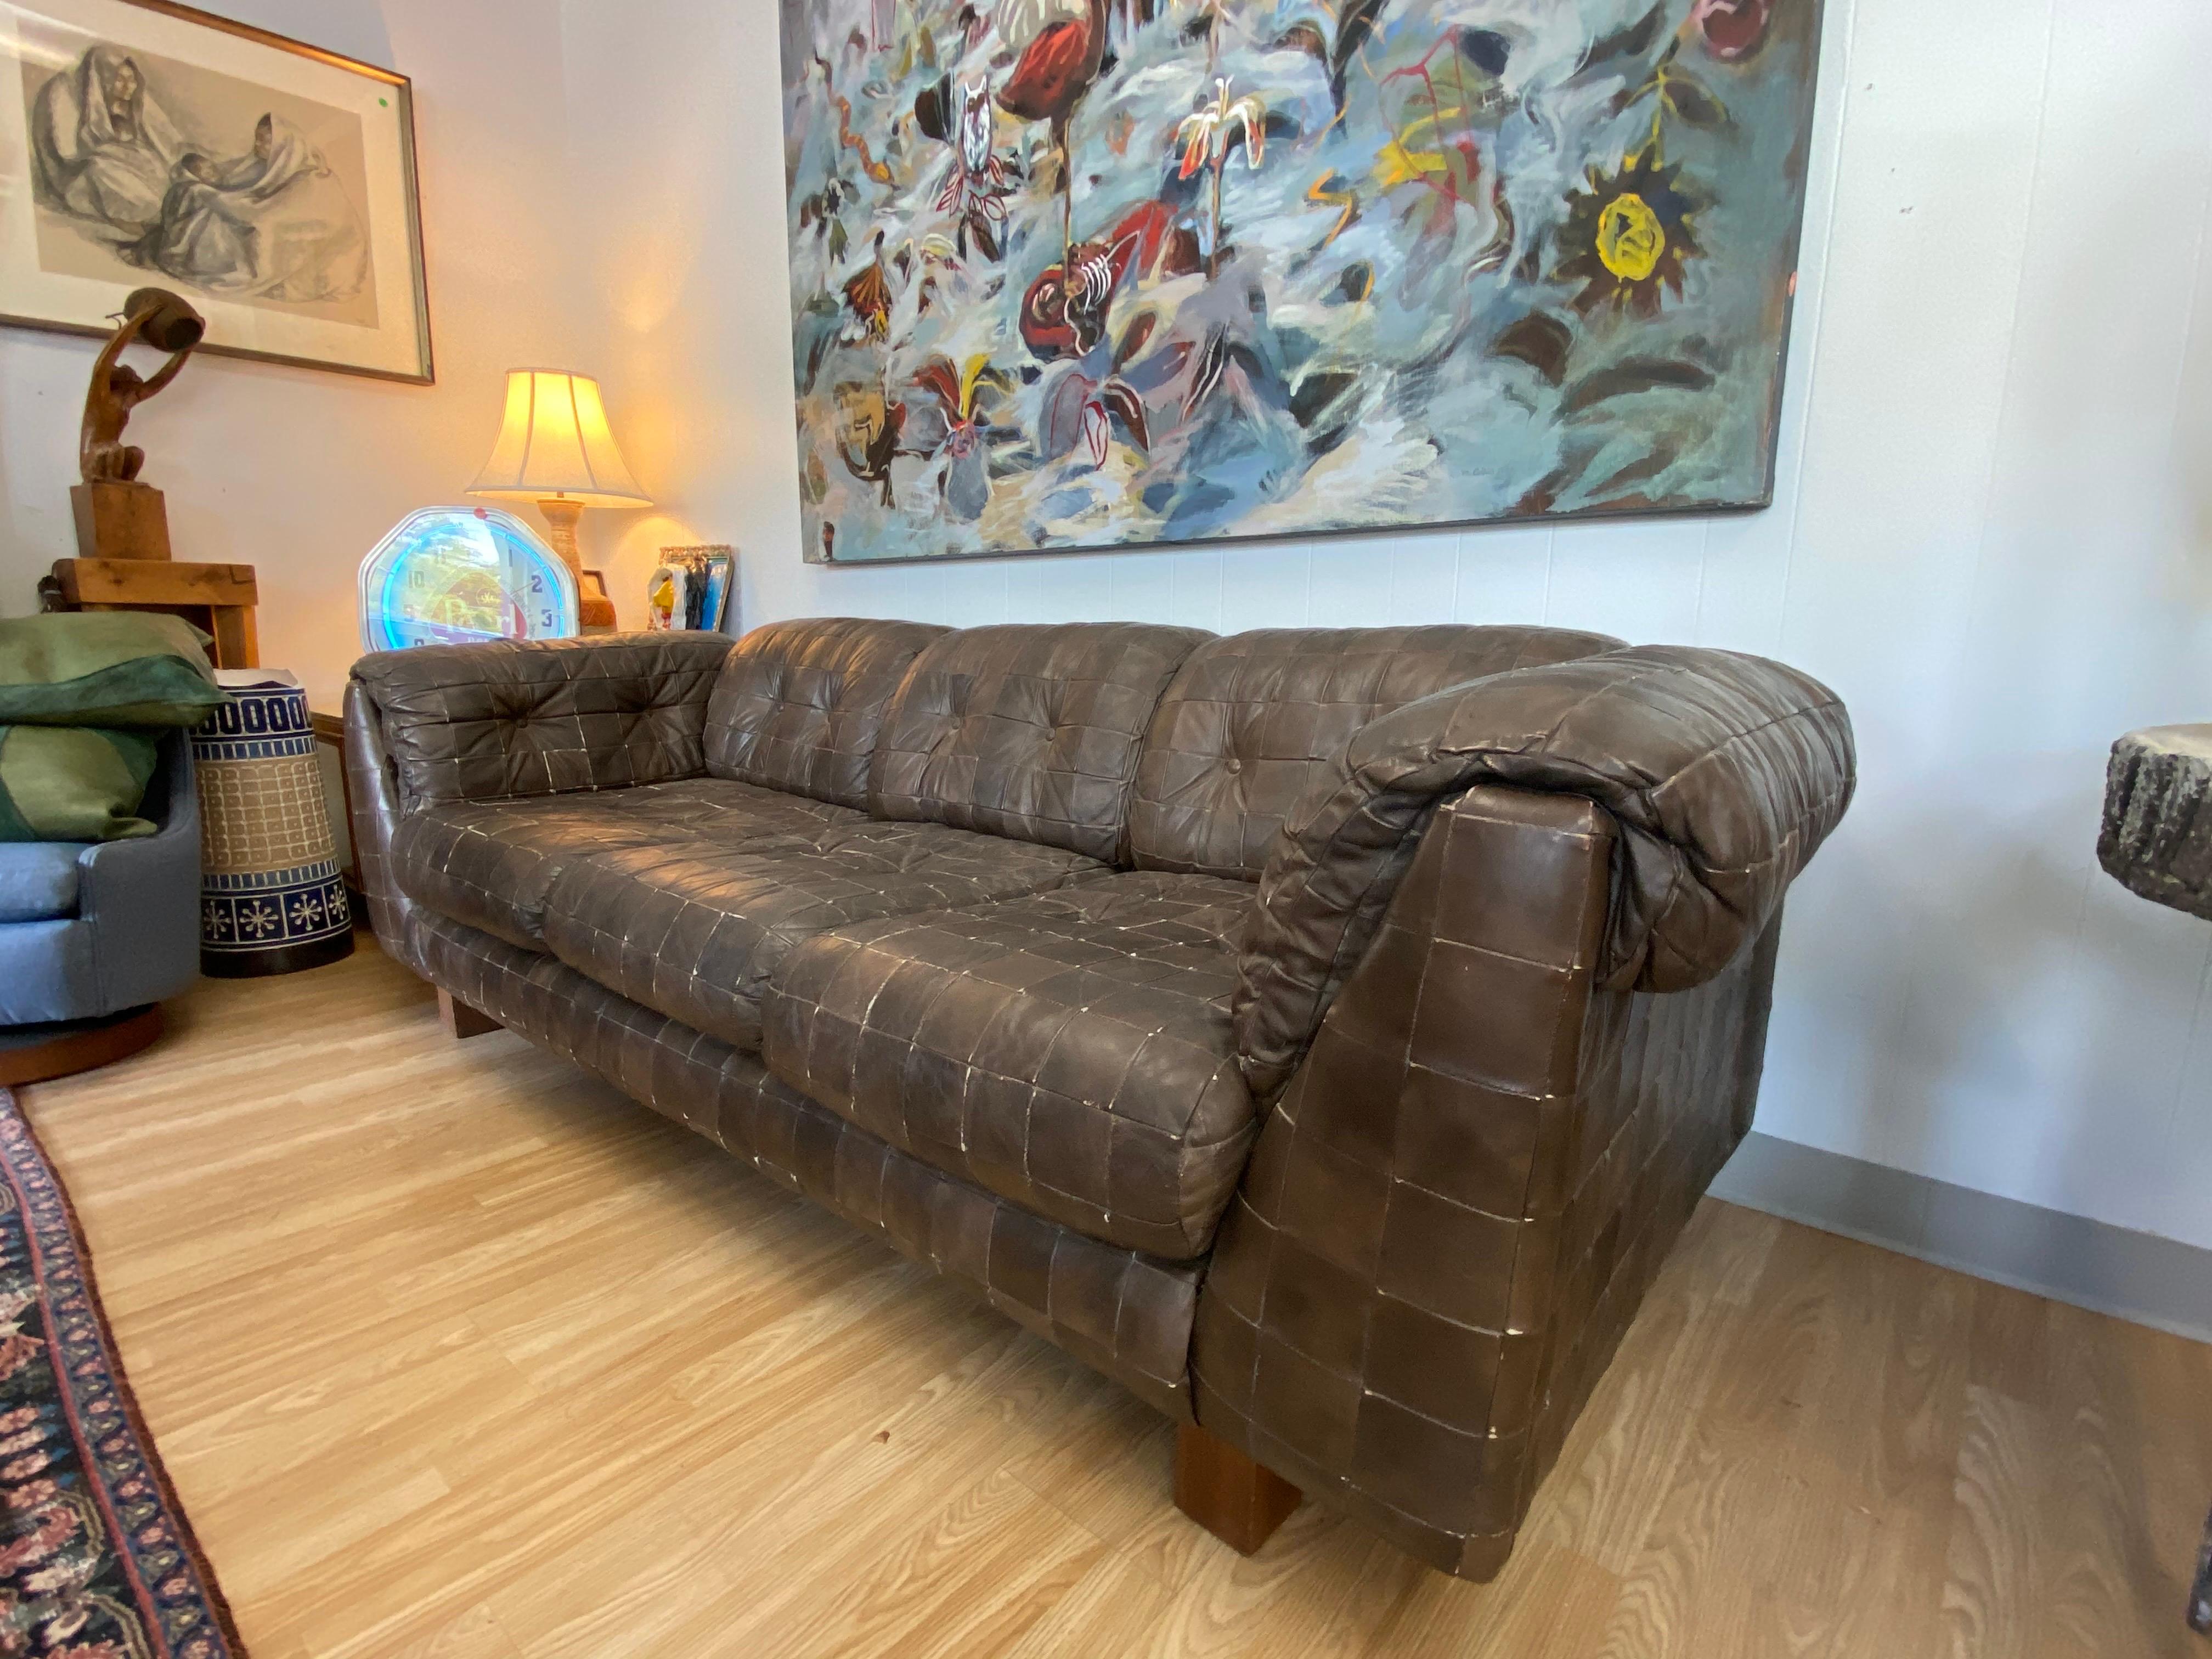 This vintage leather patchwork sofa is a warm brown color and is nicely worn and in good condition.